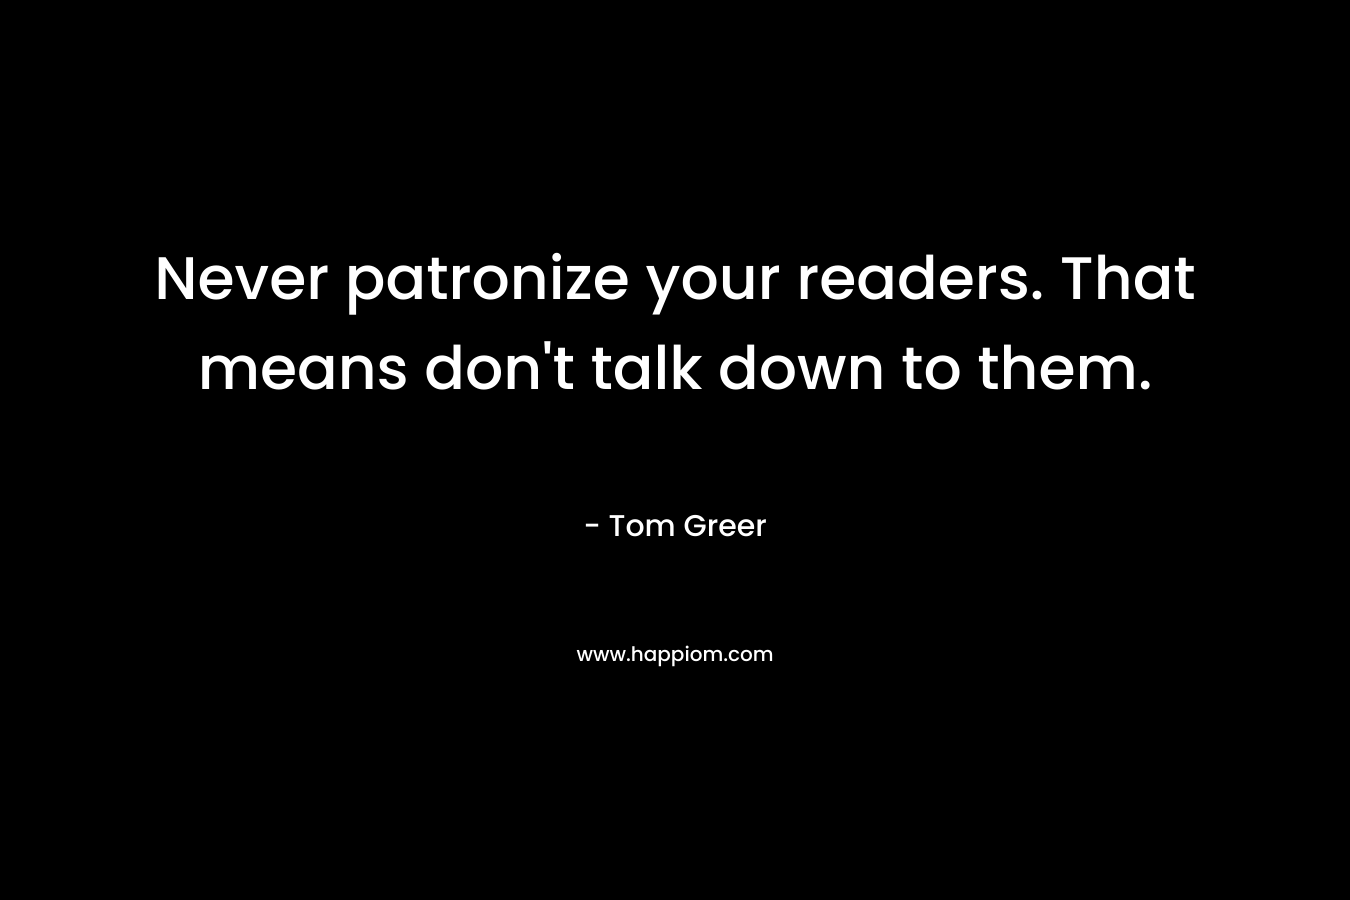 Never patronize your readers. That means don't talk down to them.